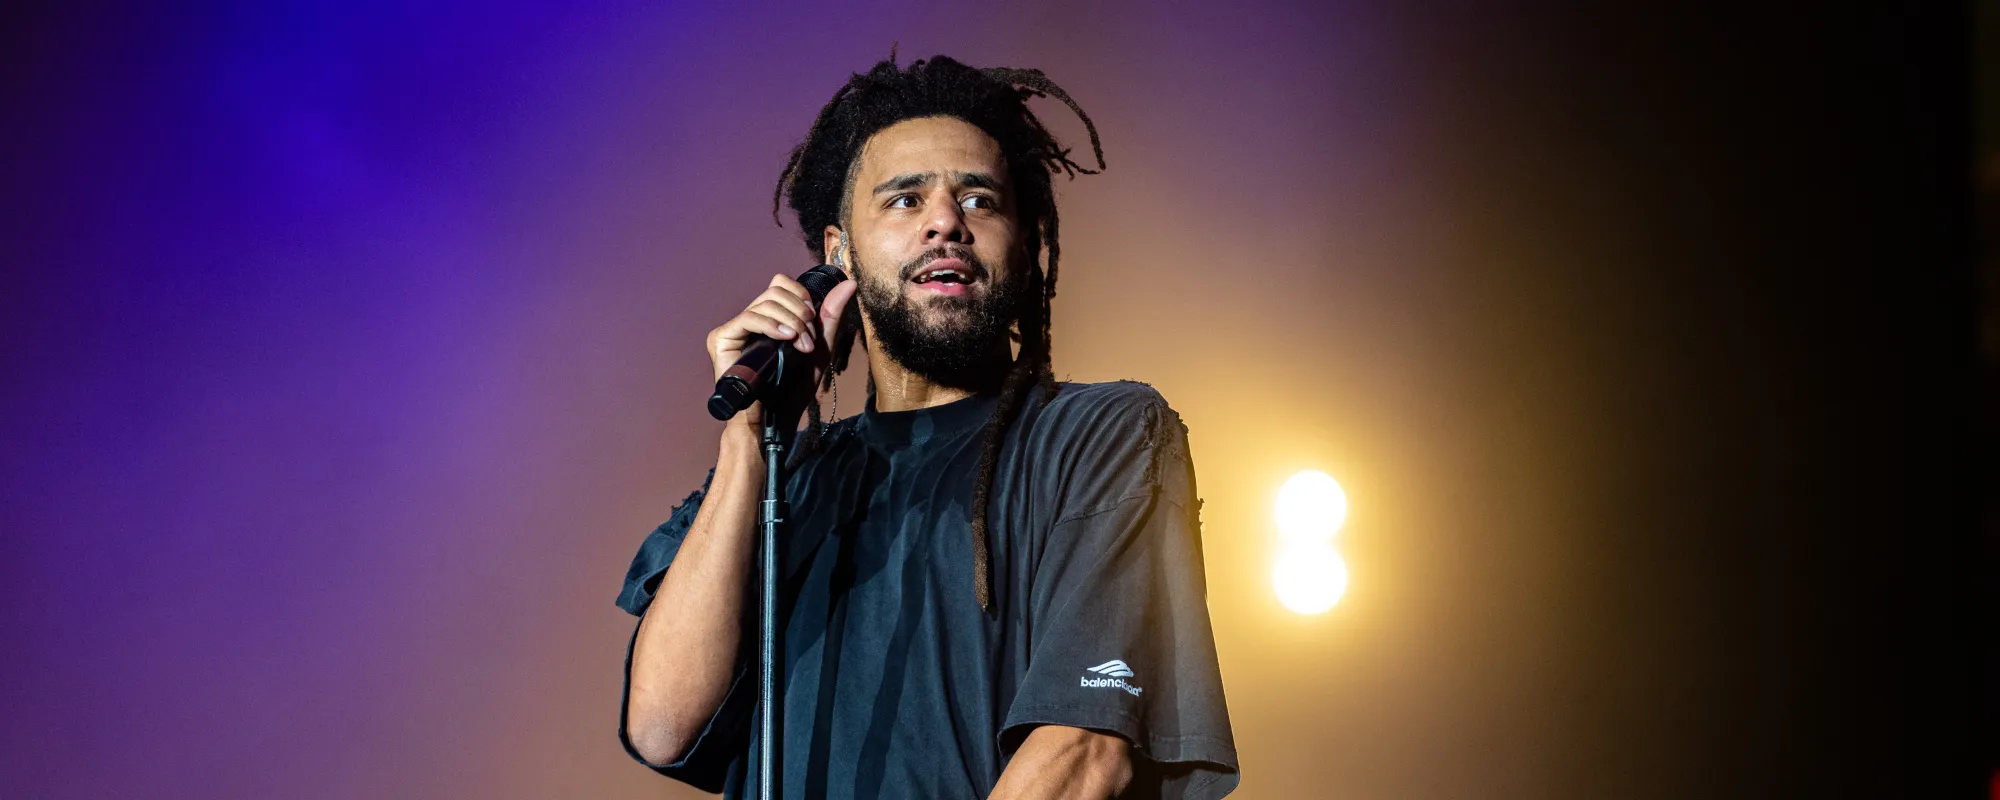 J. Cole Teams Up with Lil Yachty for New Song “The Secret Recipe”